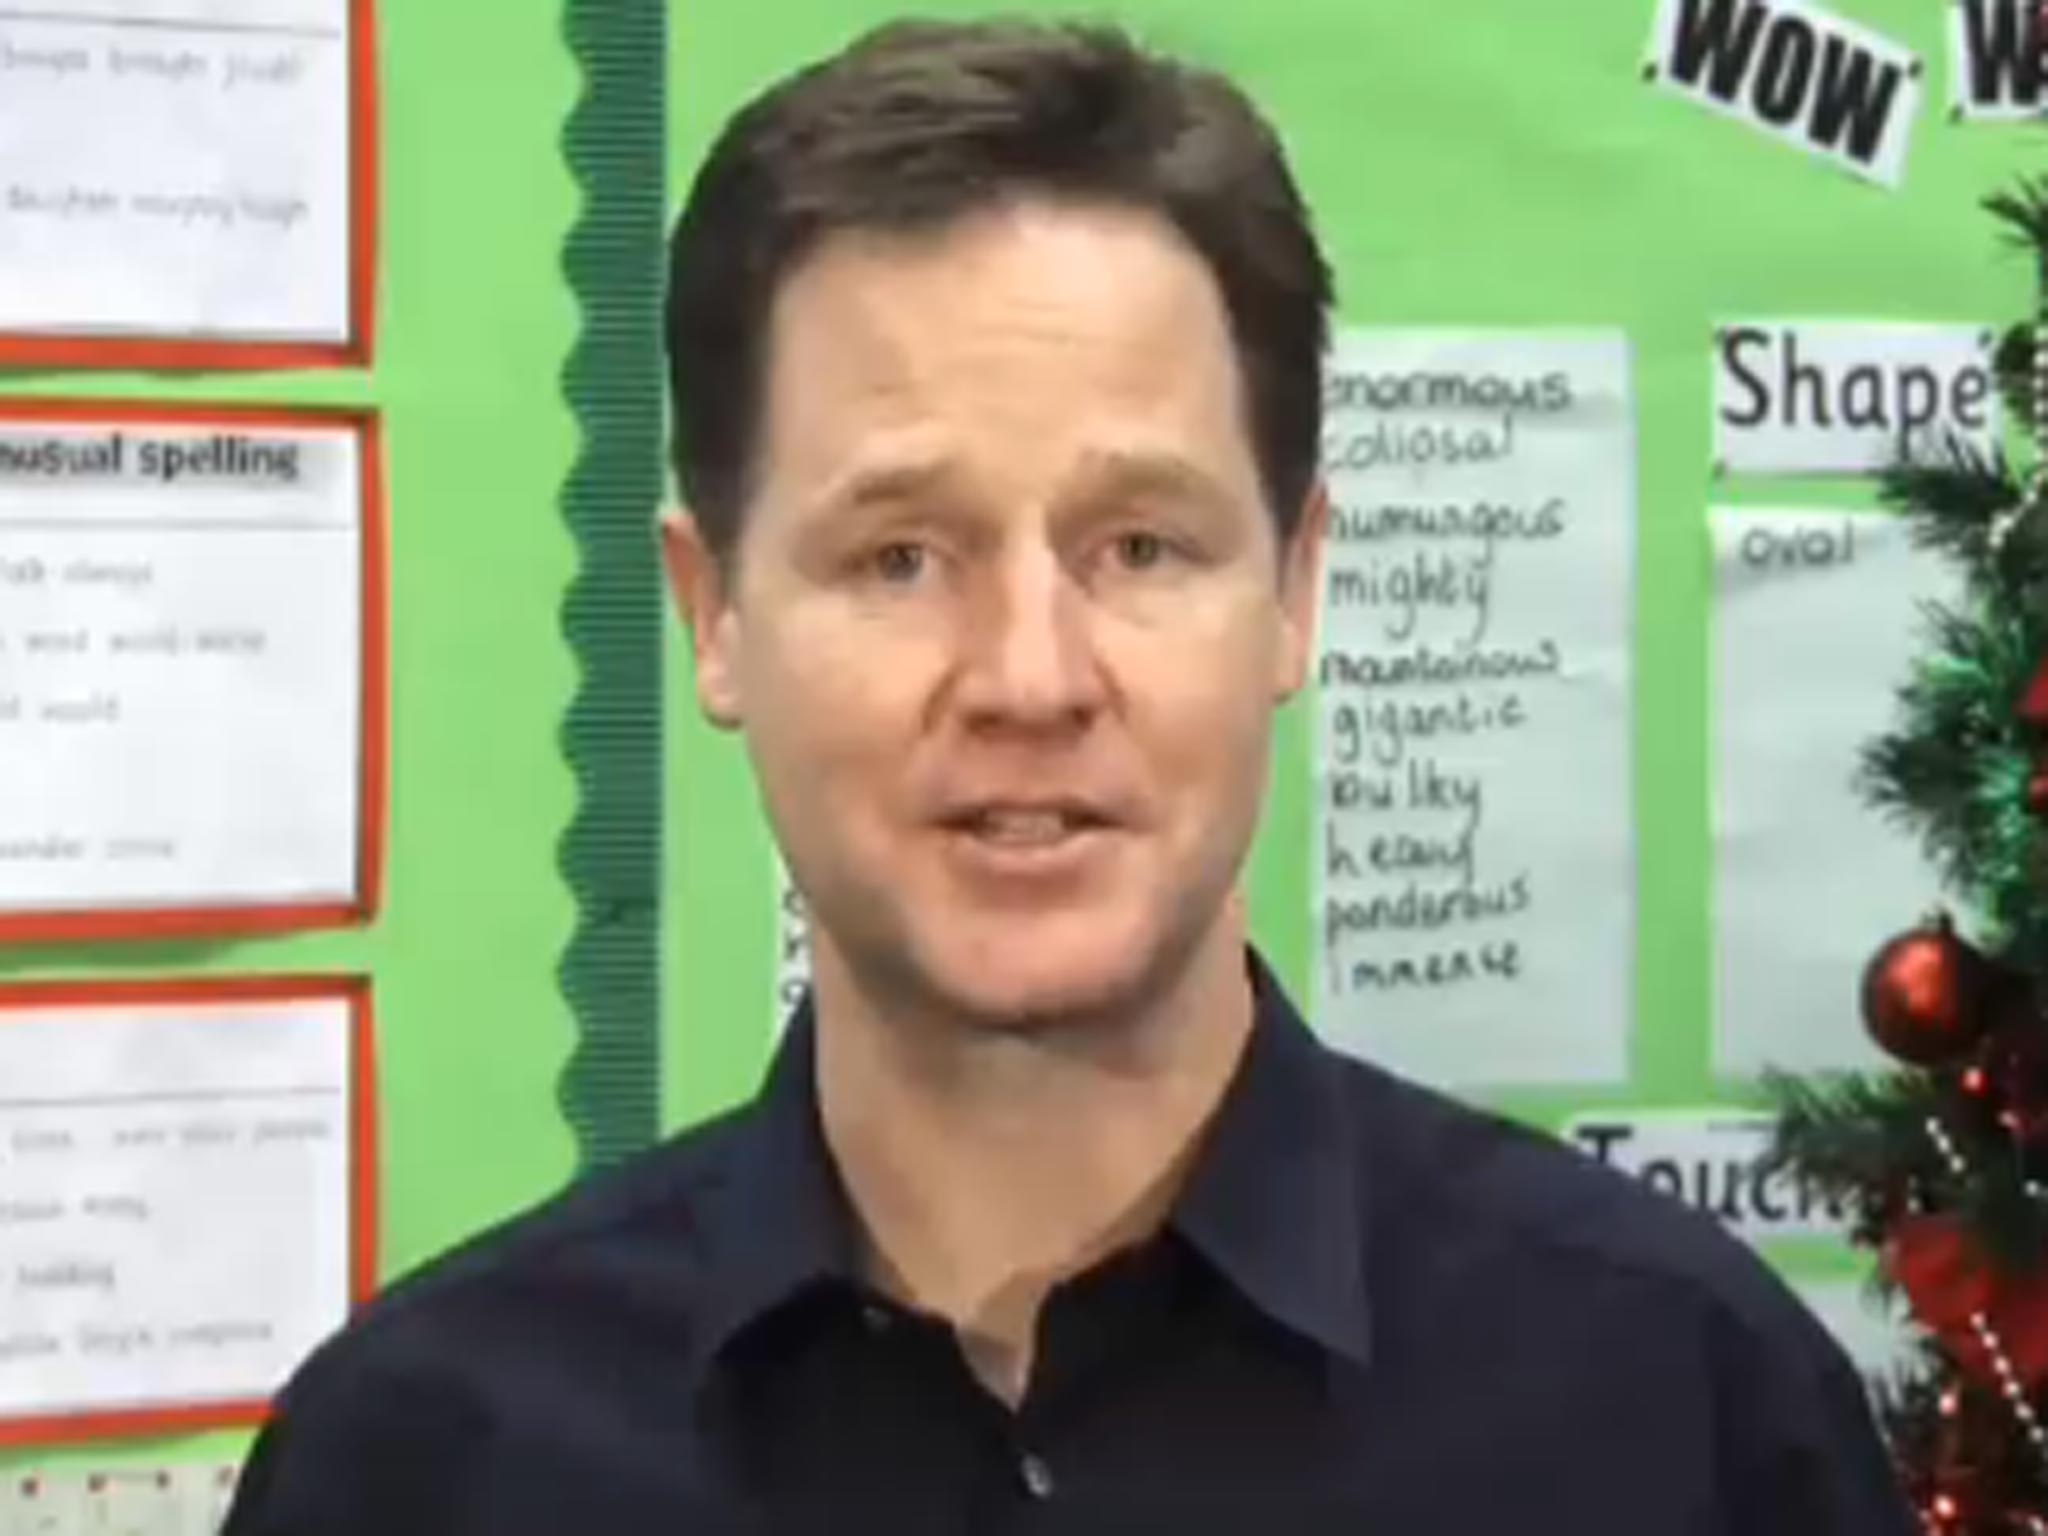 Nick Clegg posted a Christmas message championing the work of volunteers over the festive period